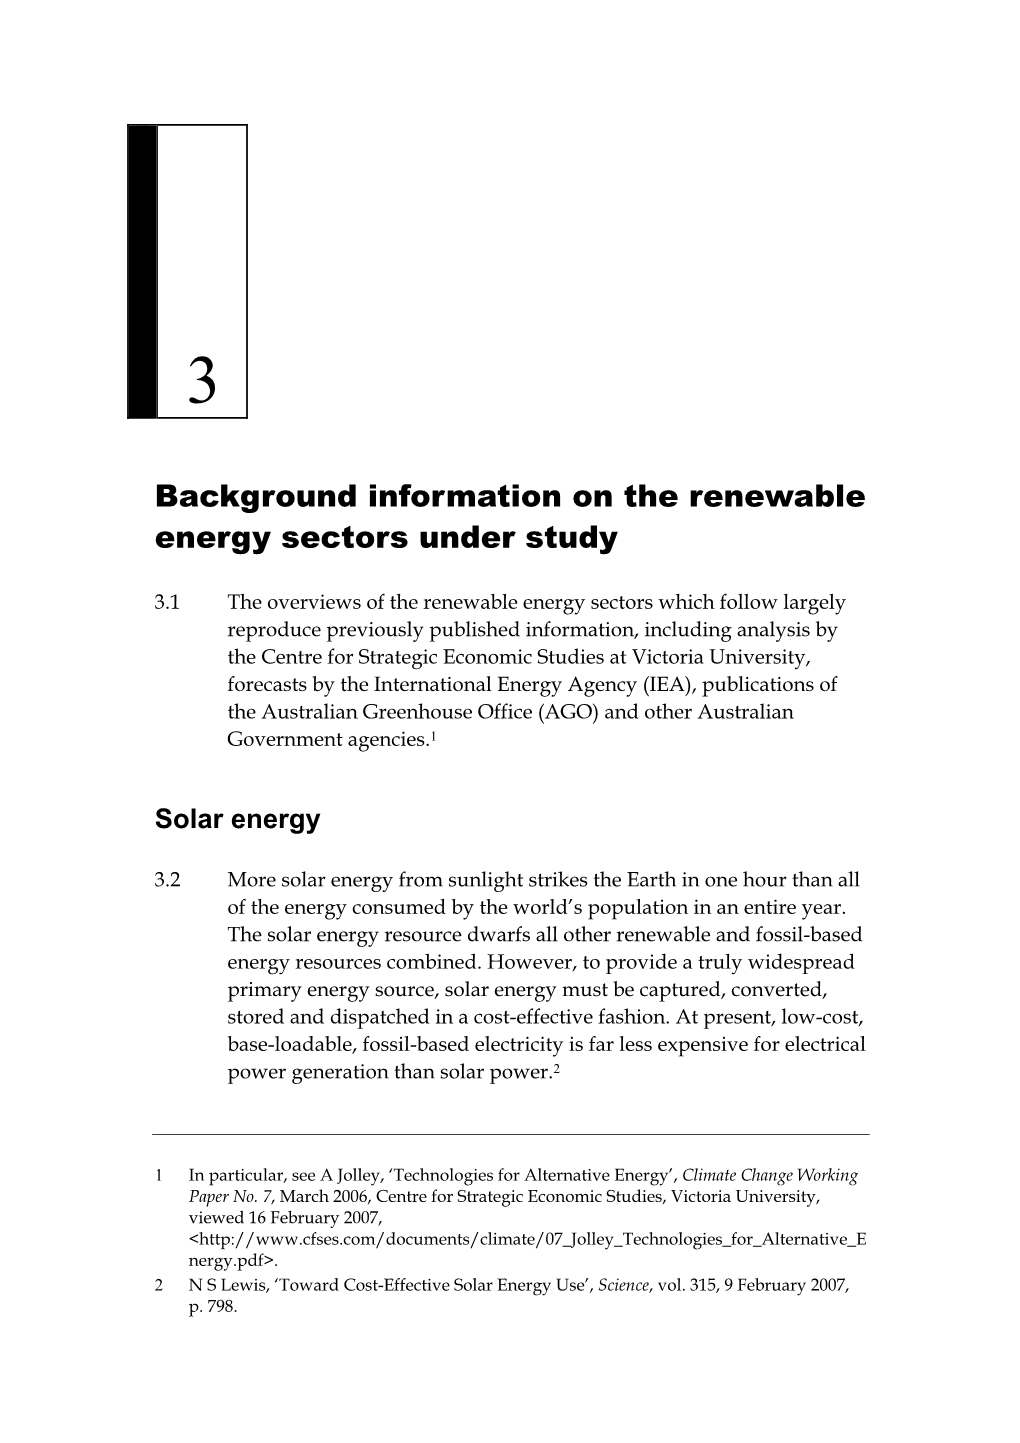 Background Information on the Renewable Energy Sectors Under Study